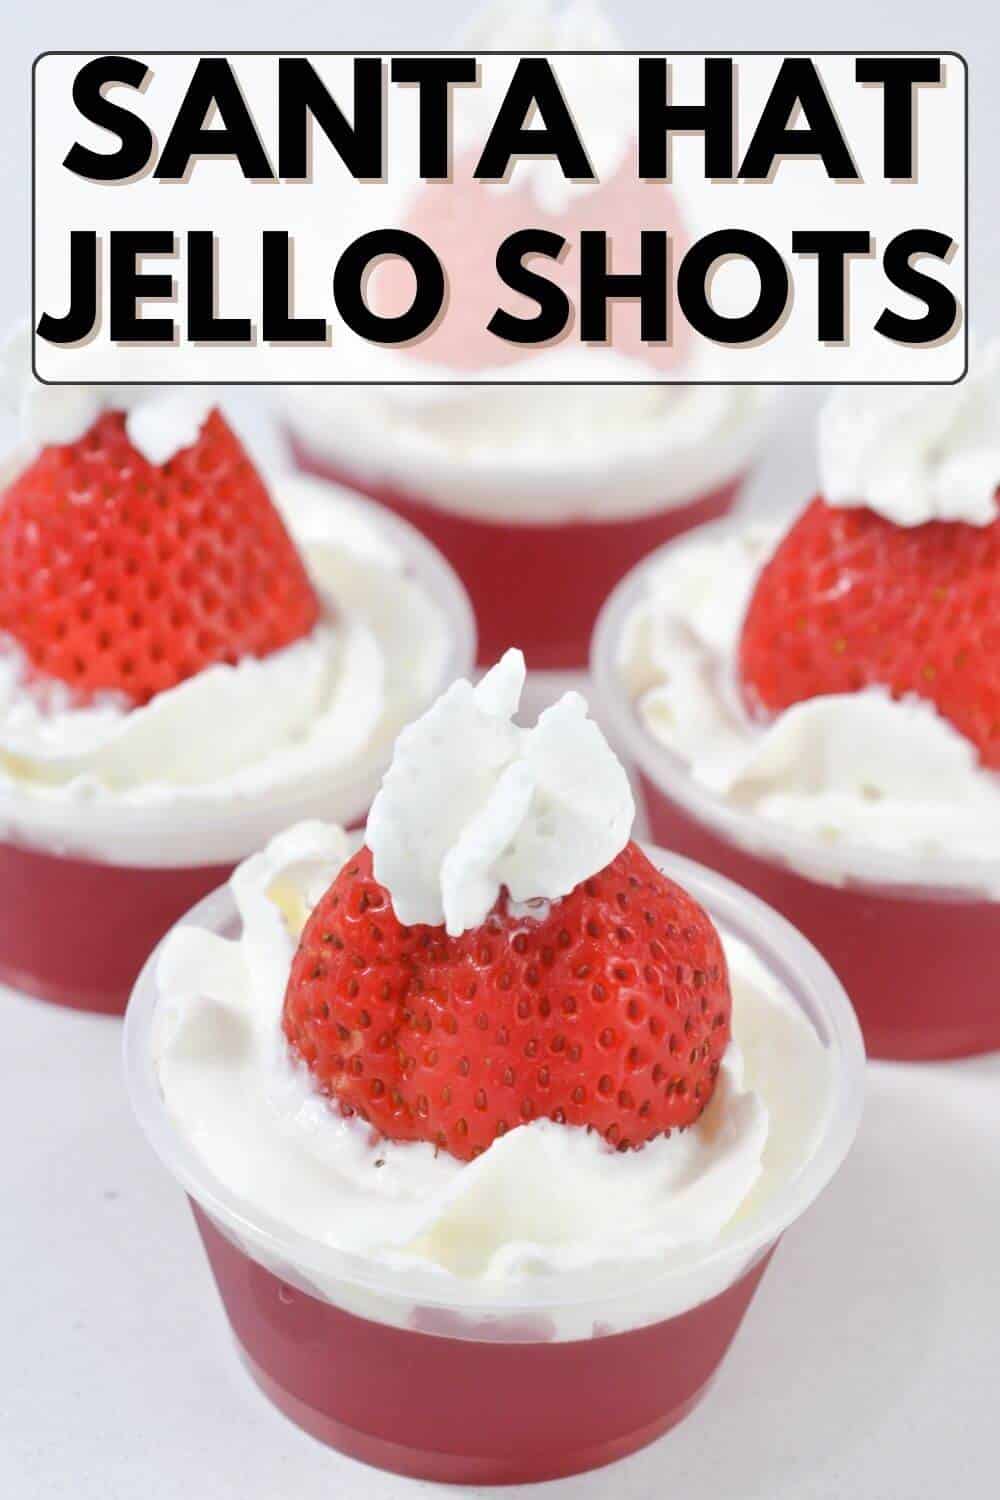 Santa Hat Jello Shots: Get into the festive spirit with these adorable treats that combine the fun of jello shots with the iconic look of Santa hats. These delightful concoctions are perfect for holiday parties